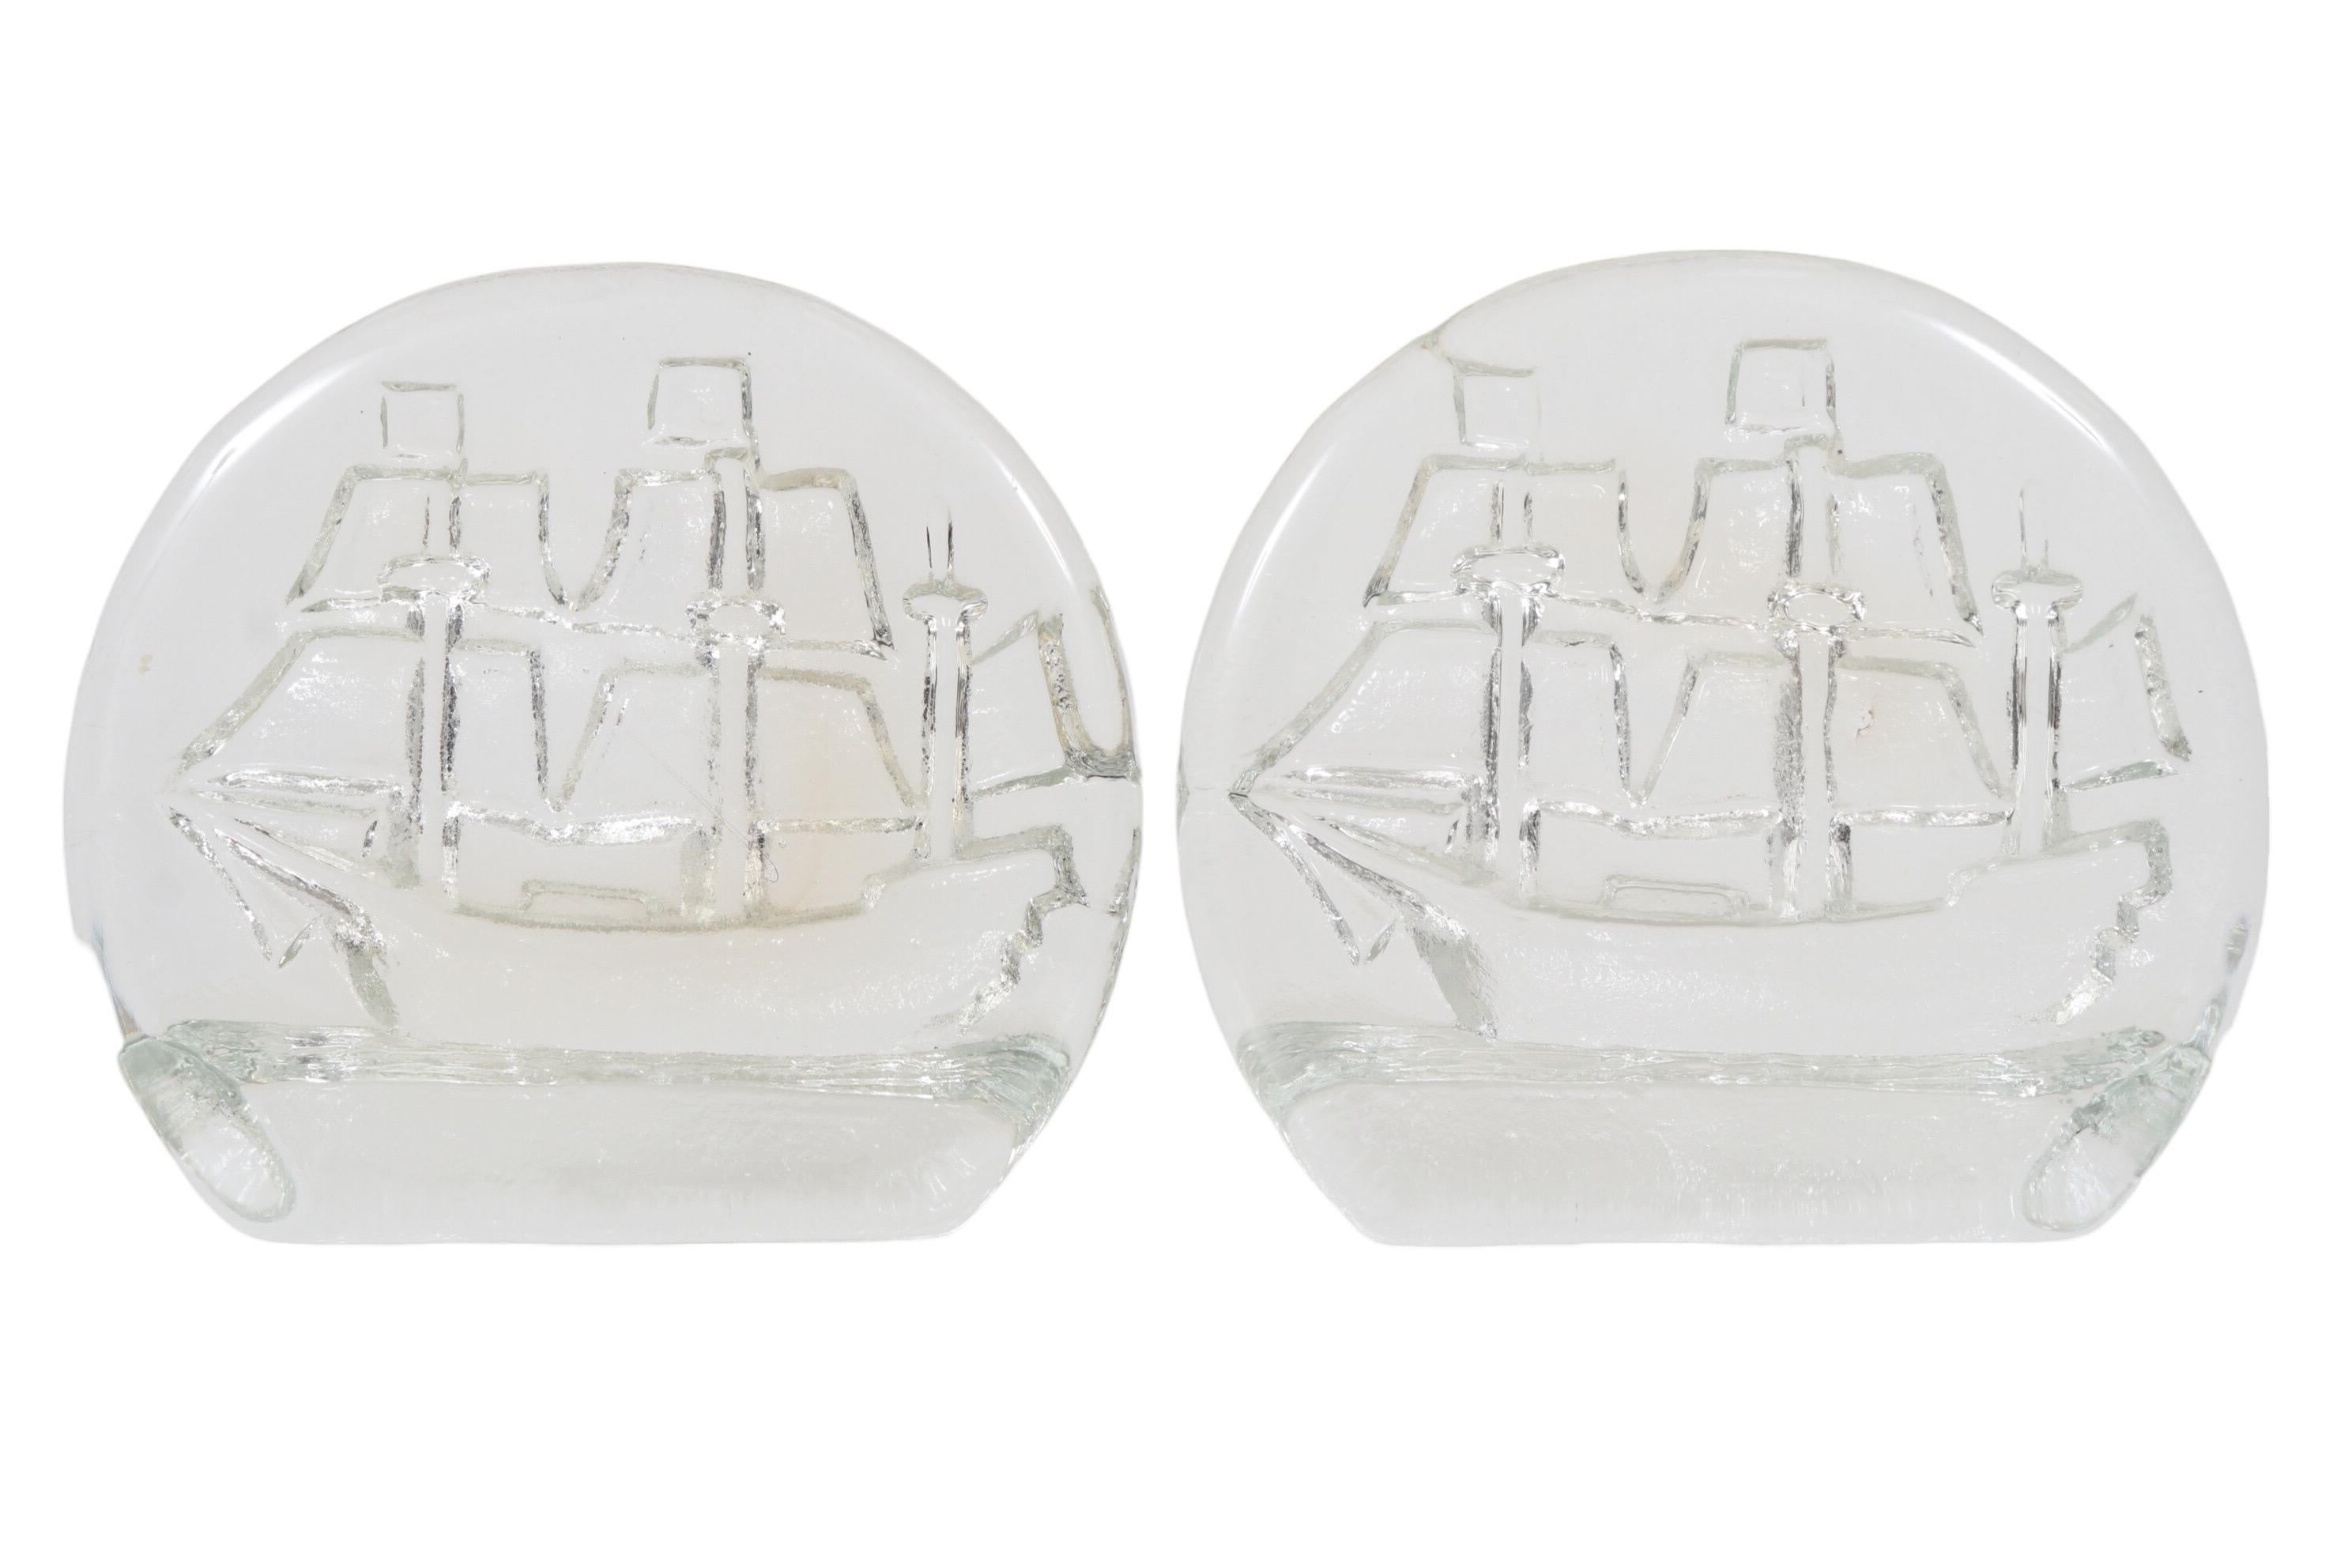 Blenko Glass Ship Bookends, a Pair In Excellent Condition For Sale In Bradenton, FL